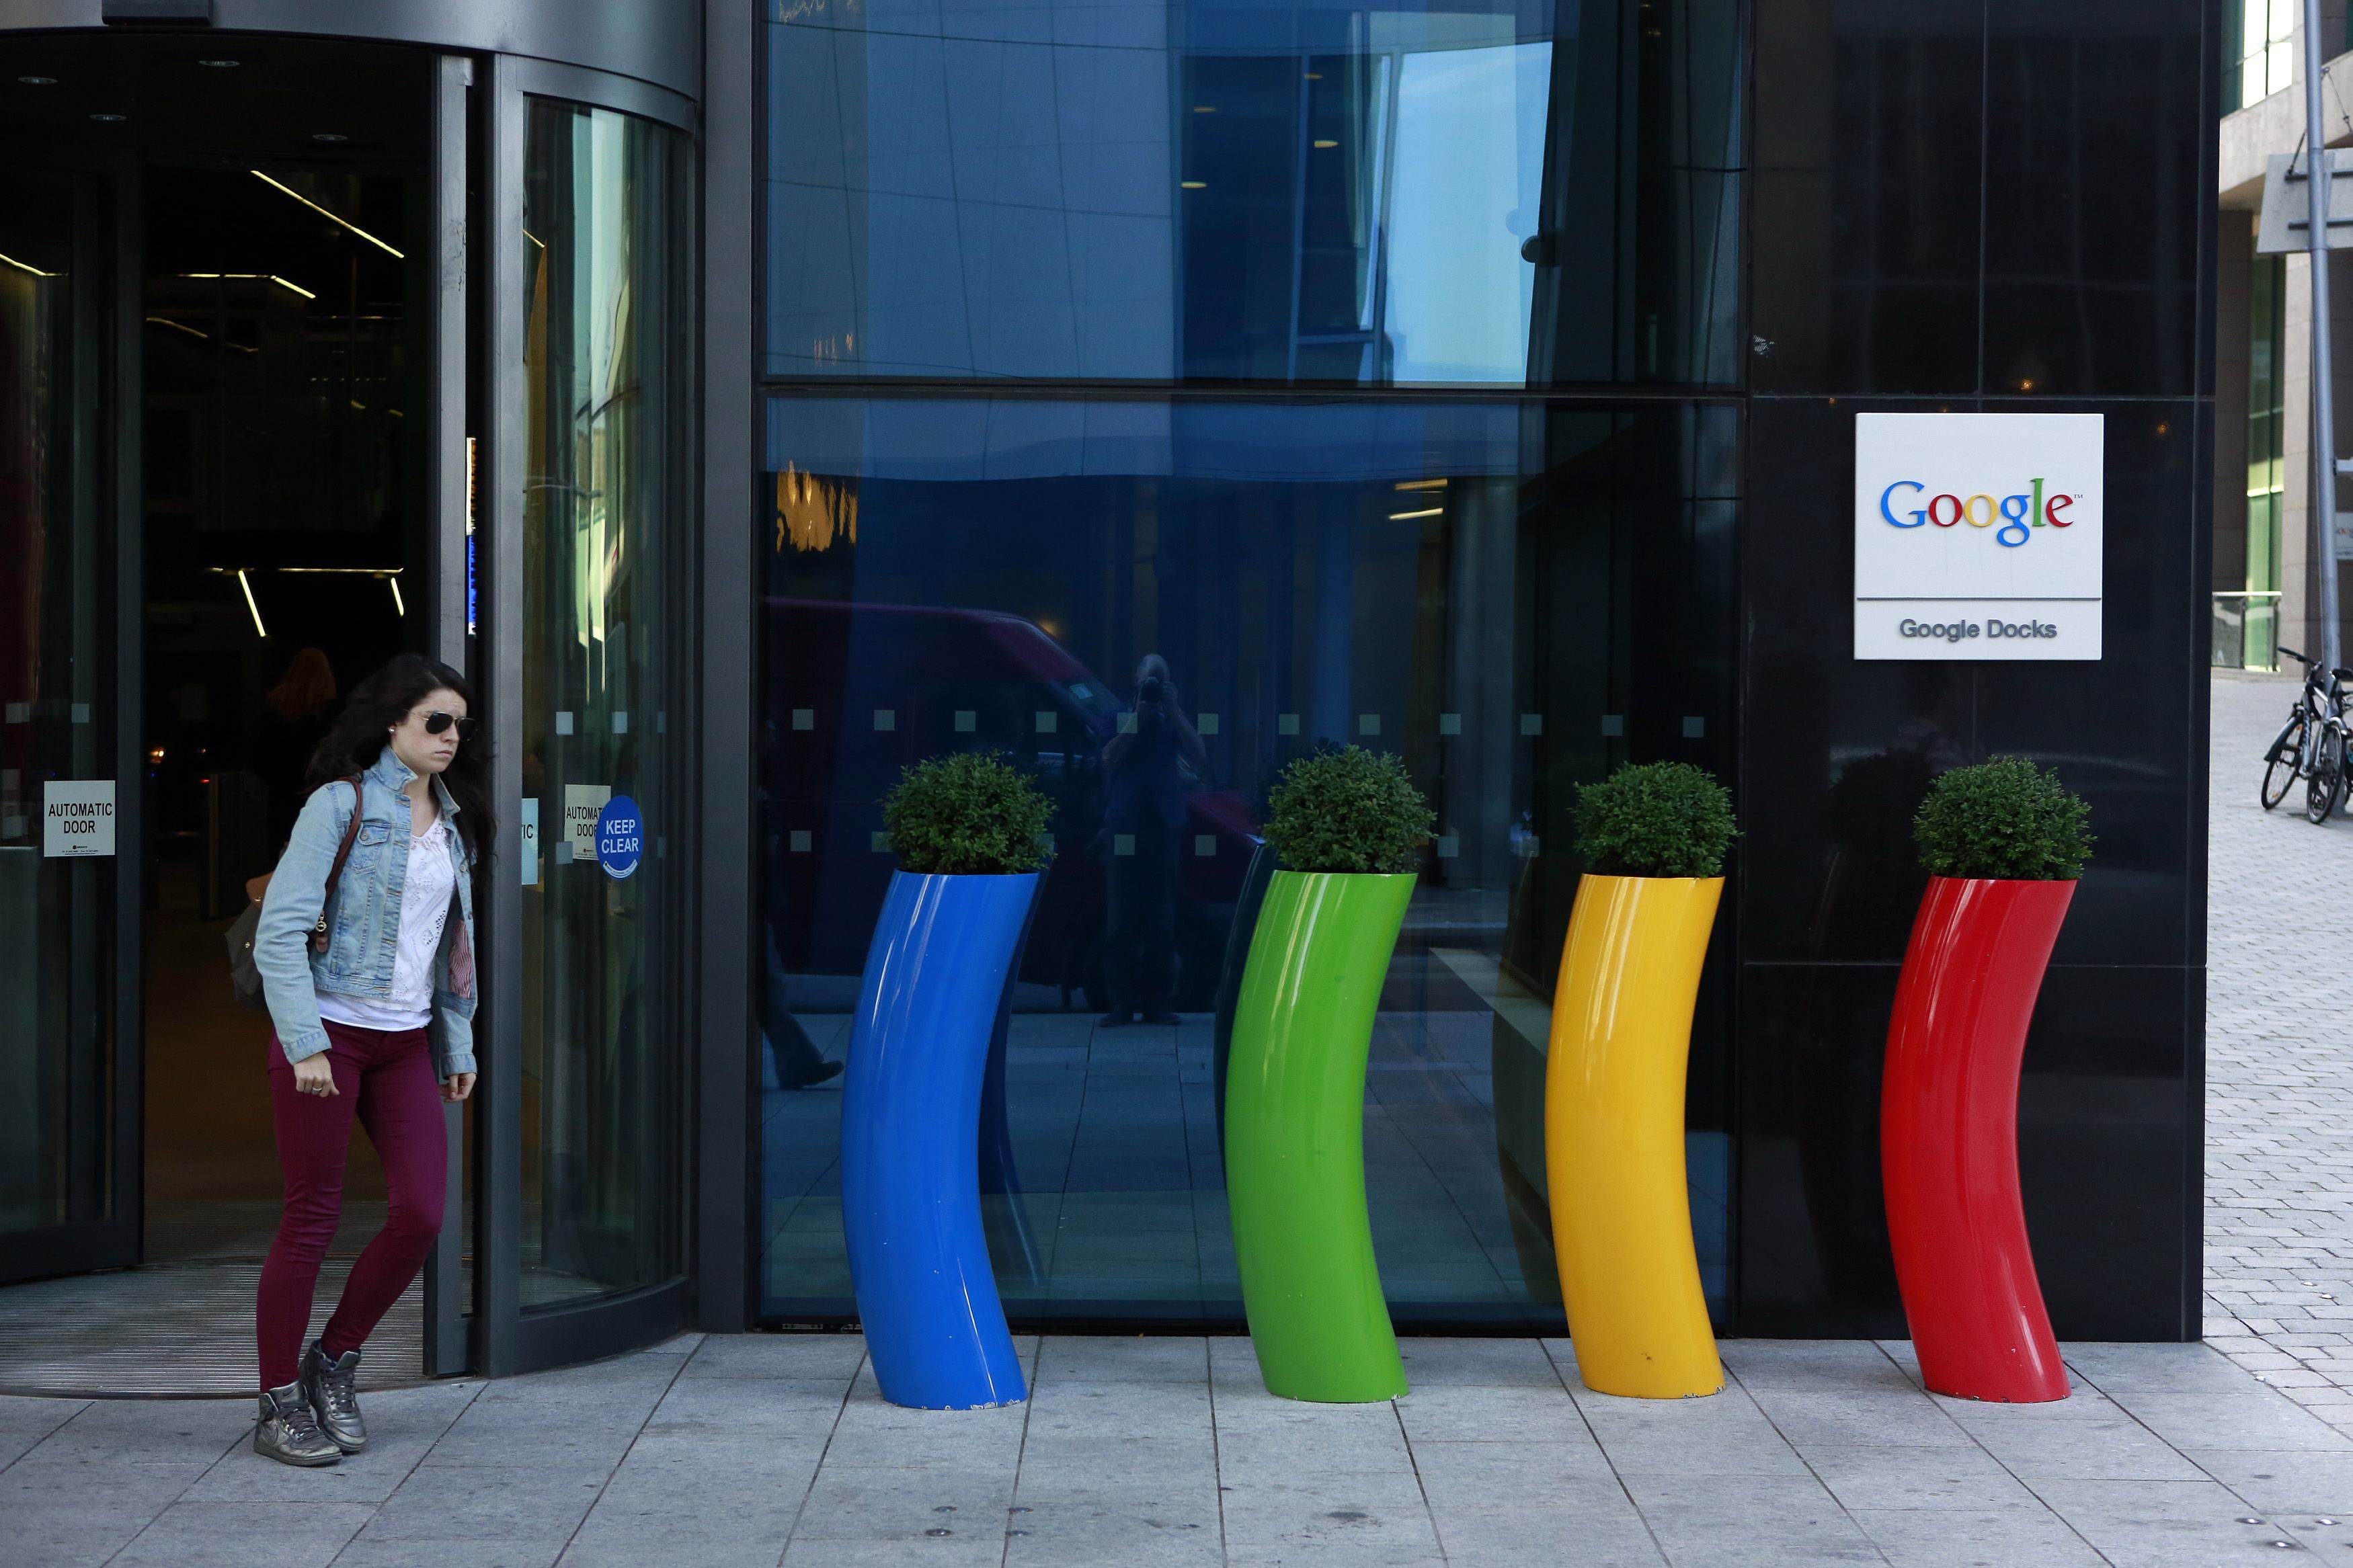 A woman walks past Google's offices near the city centre in Dublin on July 8, 2013. Photo: Reuters